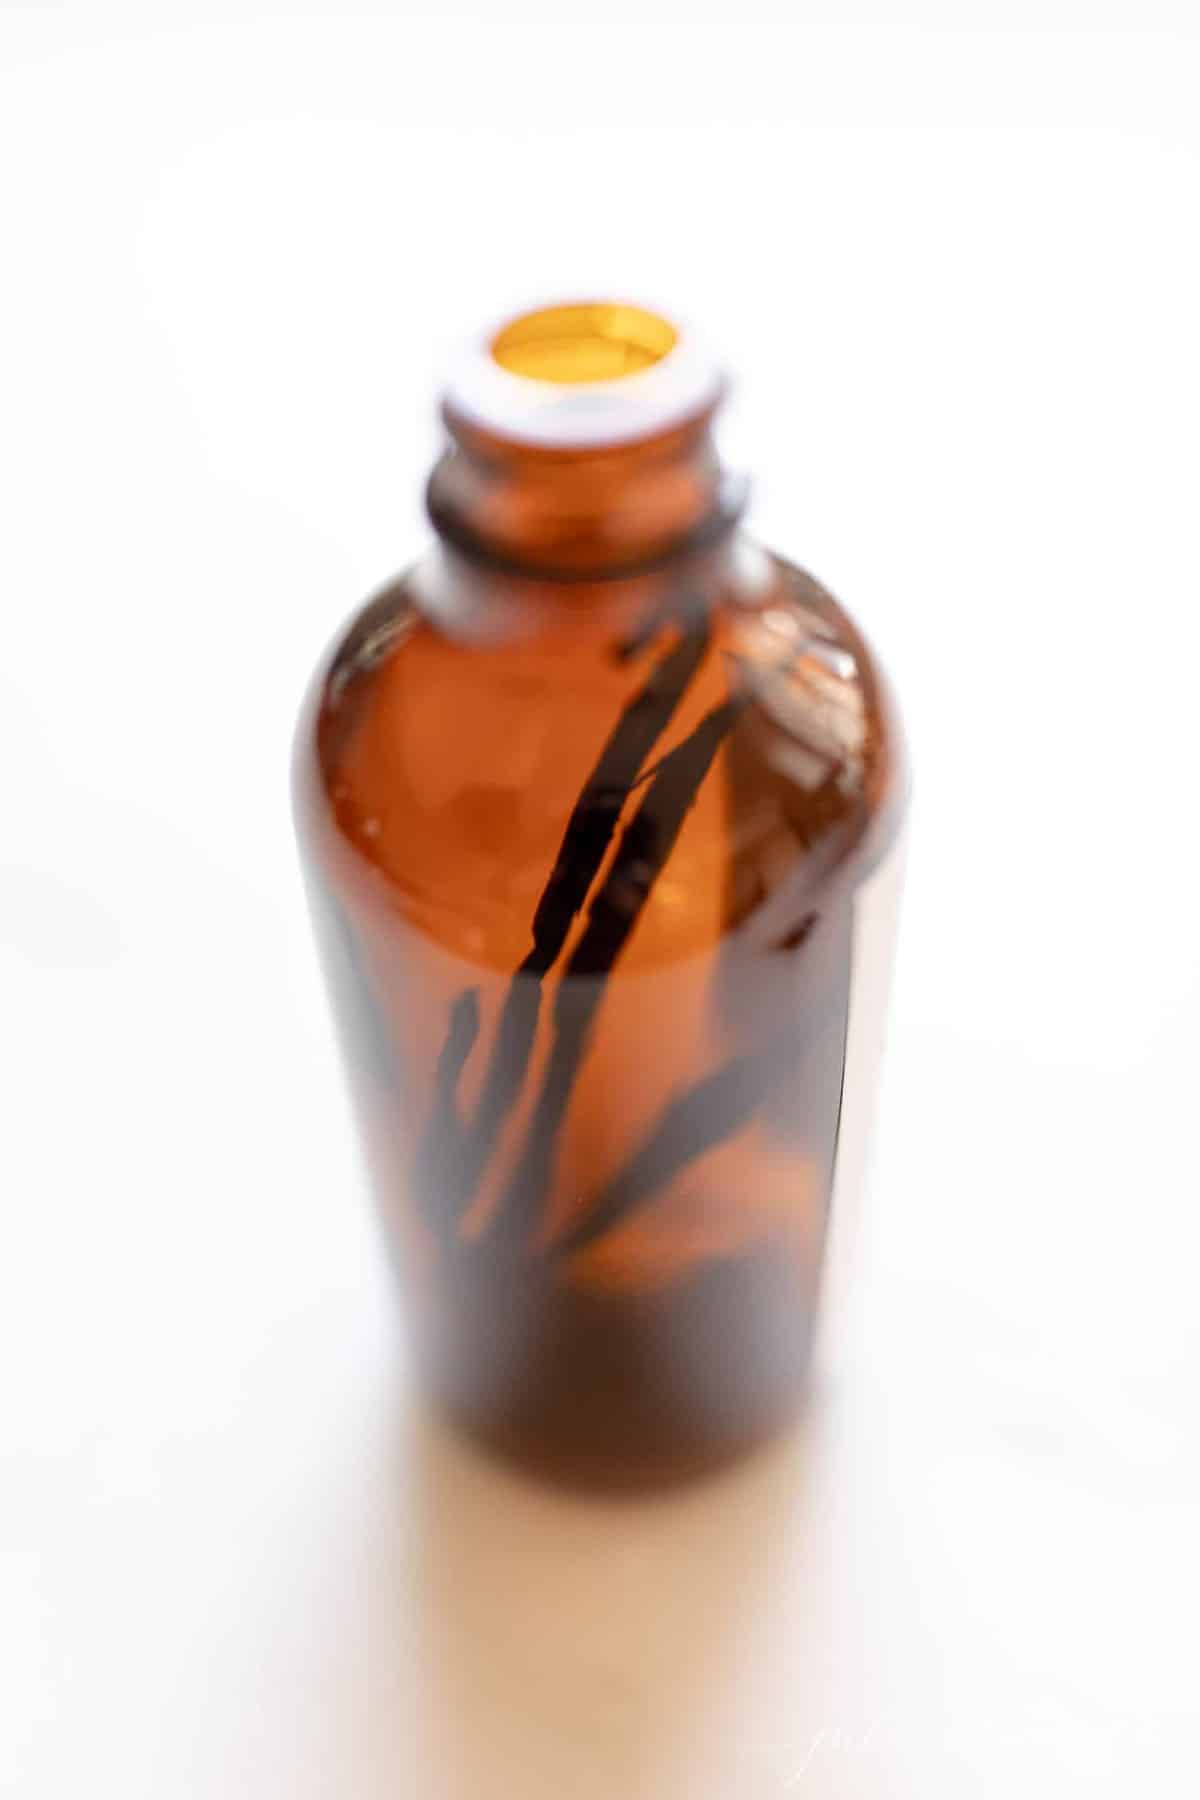 Amber bottle filled with vanilla beans on a white countertop.